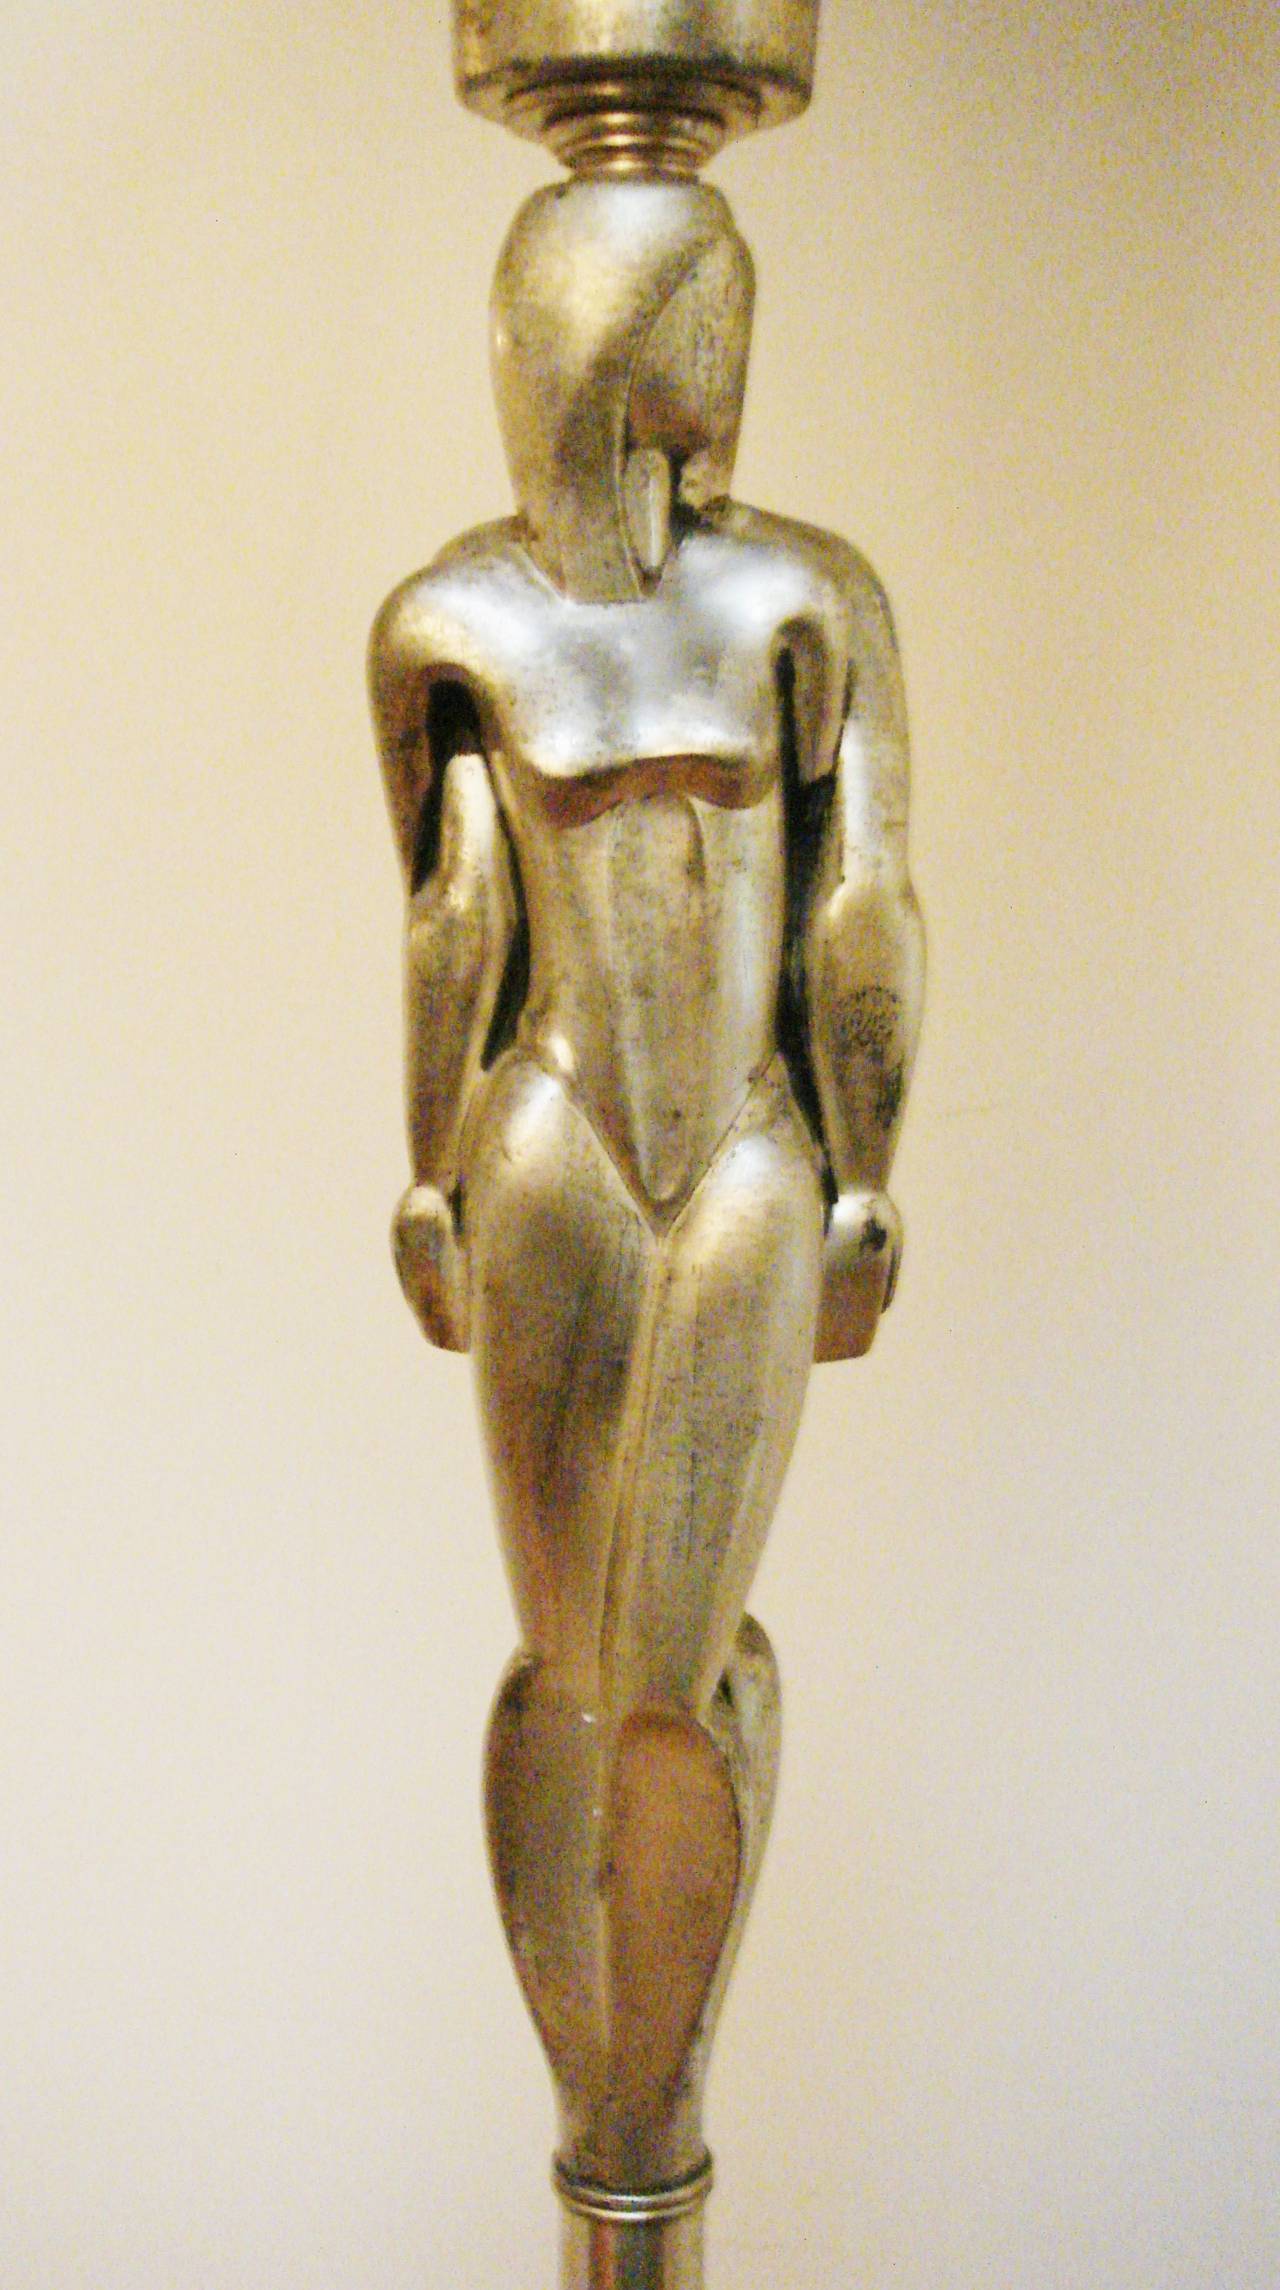 Mid-20th Century American Art Deco Nickel-Plated Figurative Torchiere by Viktor Schreckengost